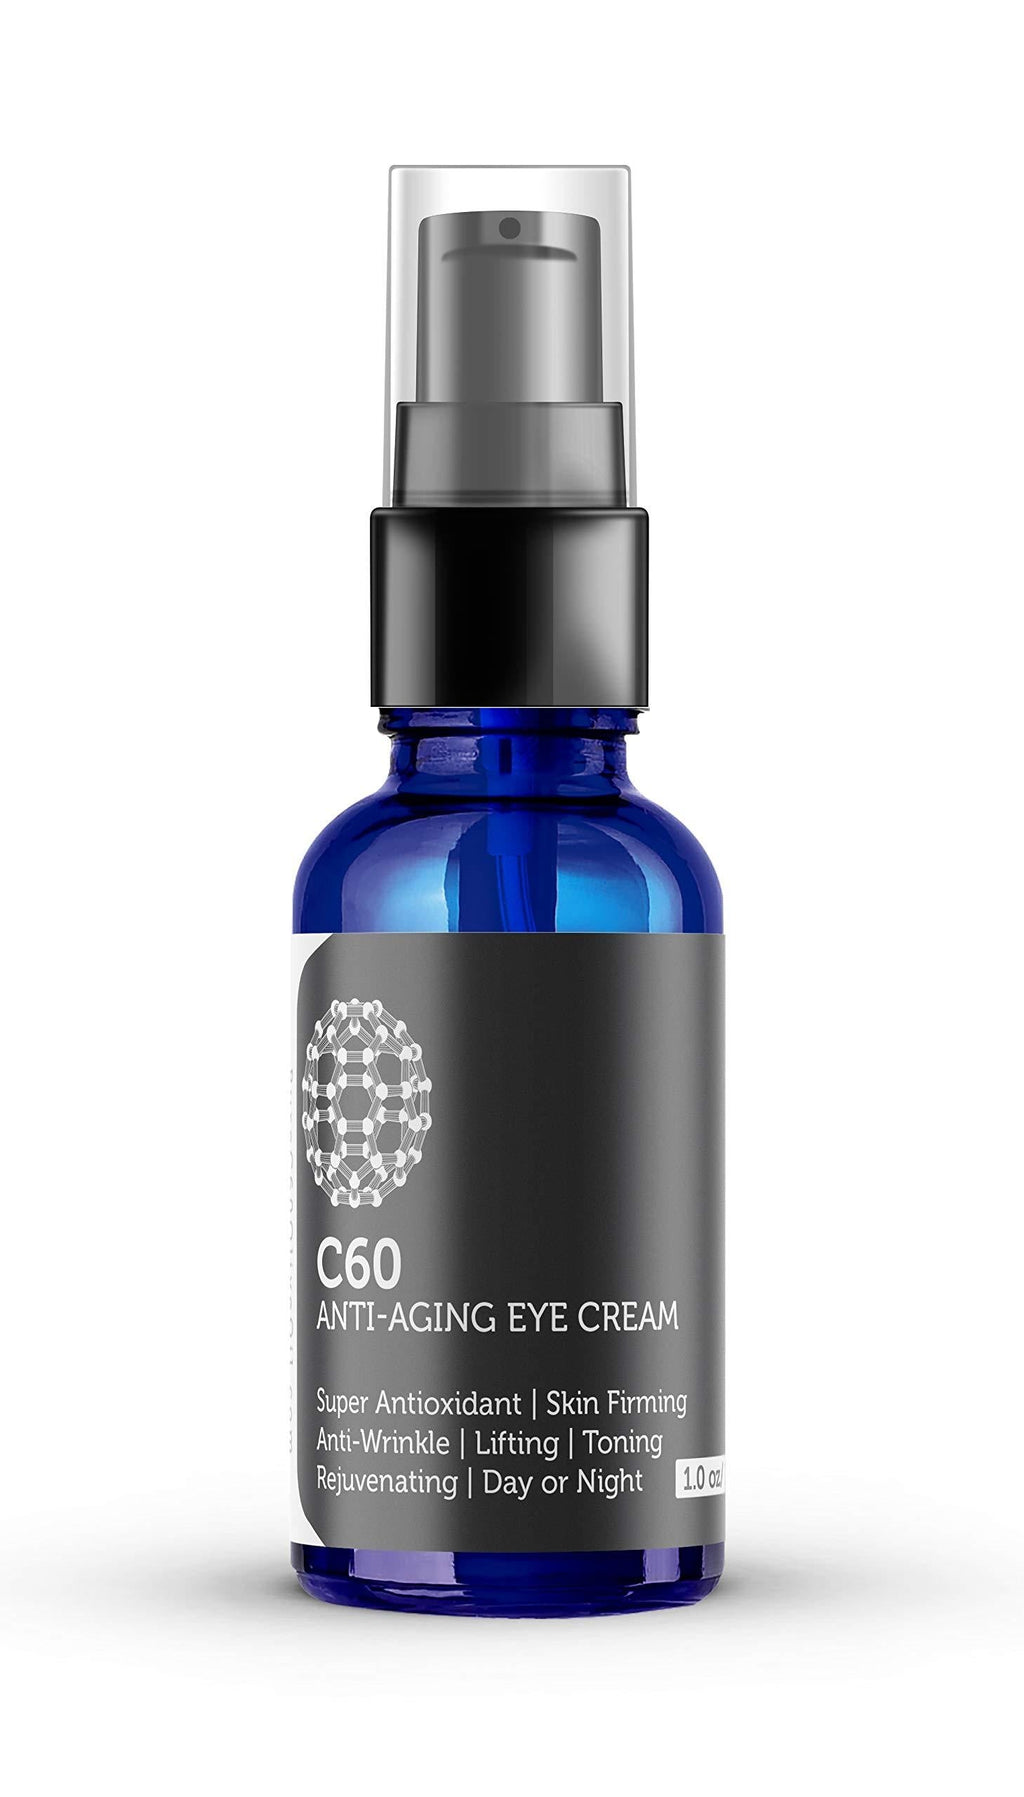 [Australia] - PureC60OliveOil Carbon 60 Anti-Aging Eye Cream 30ml with Matrixyl 3000, Tripeptide-5, Hydrating Botanical Hyaluronic Acid and Vitamin C for Men & Women Made with Organic Ingredients 